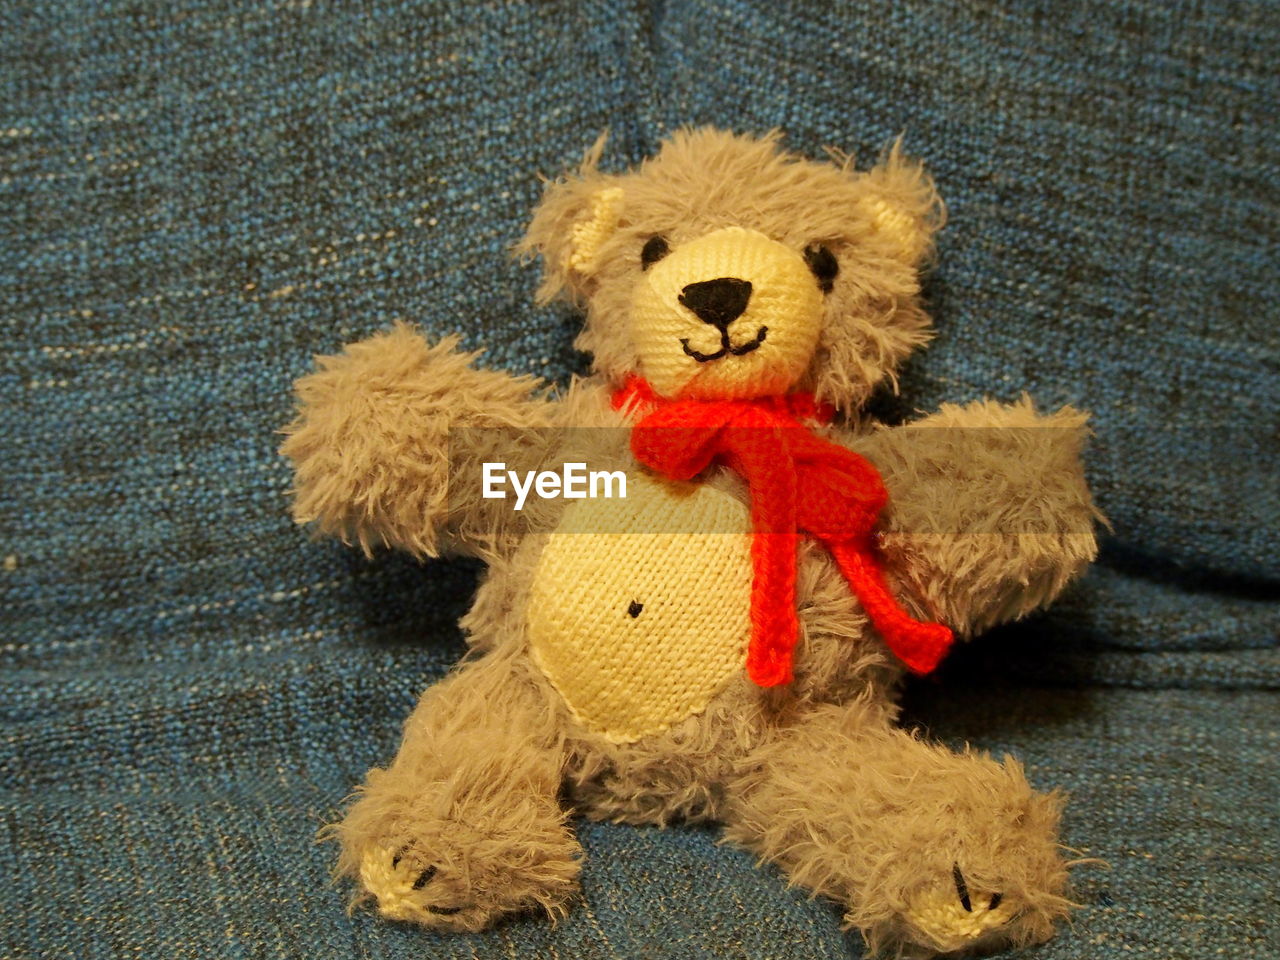 High angle view of teddy bear on textile